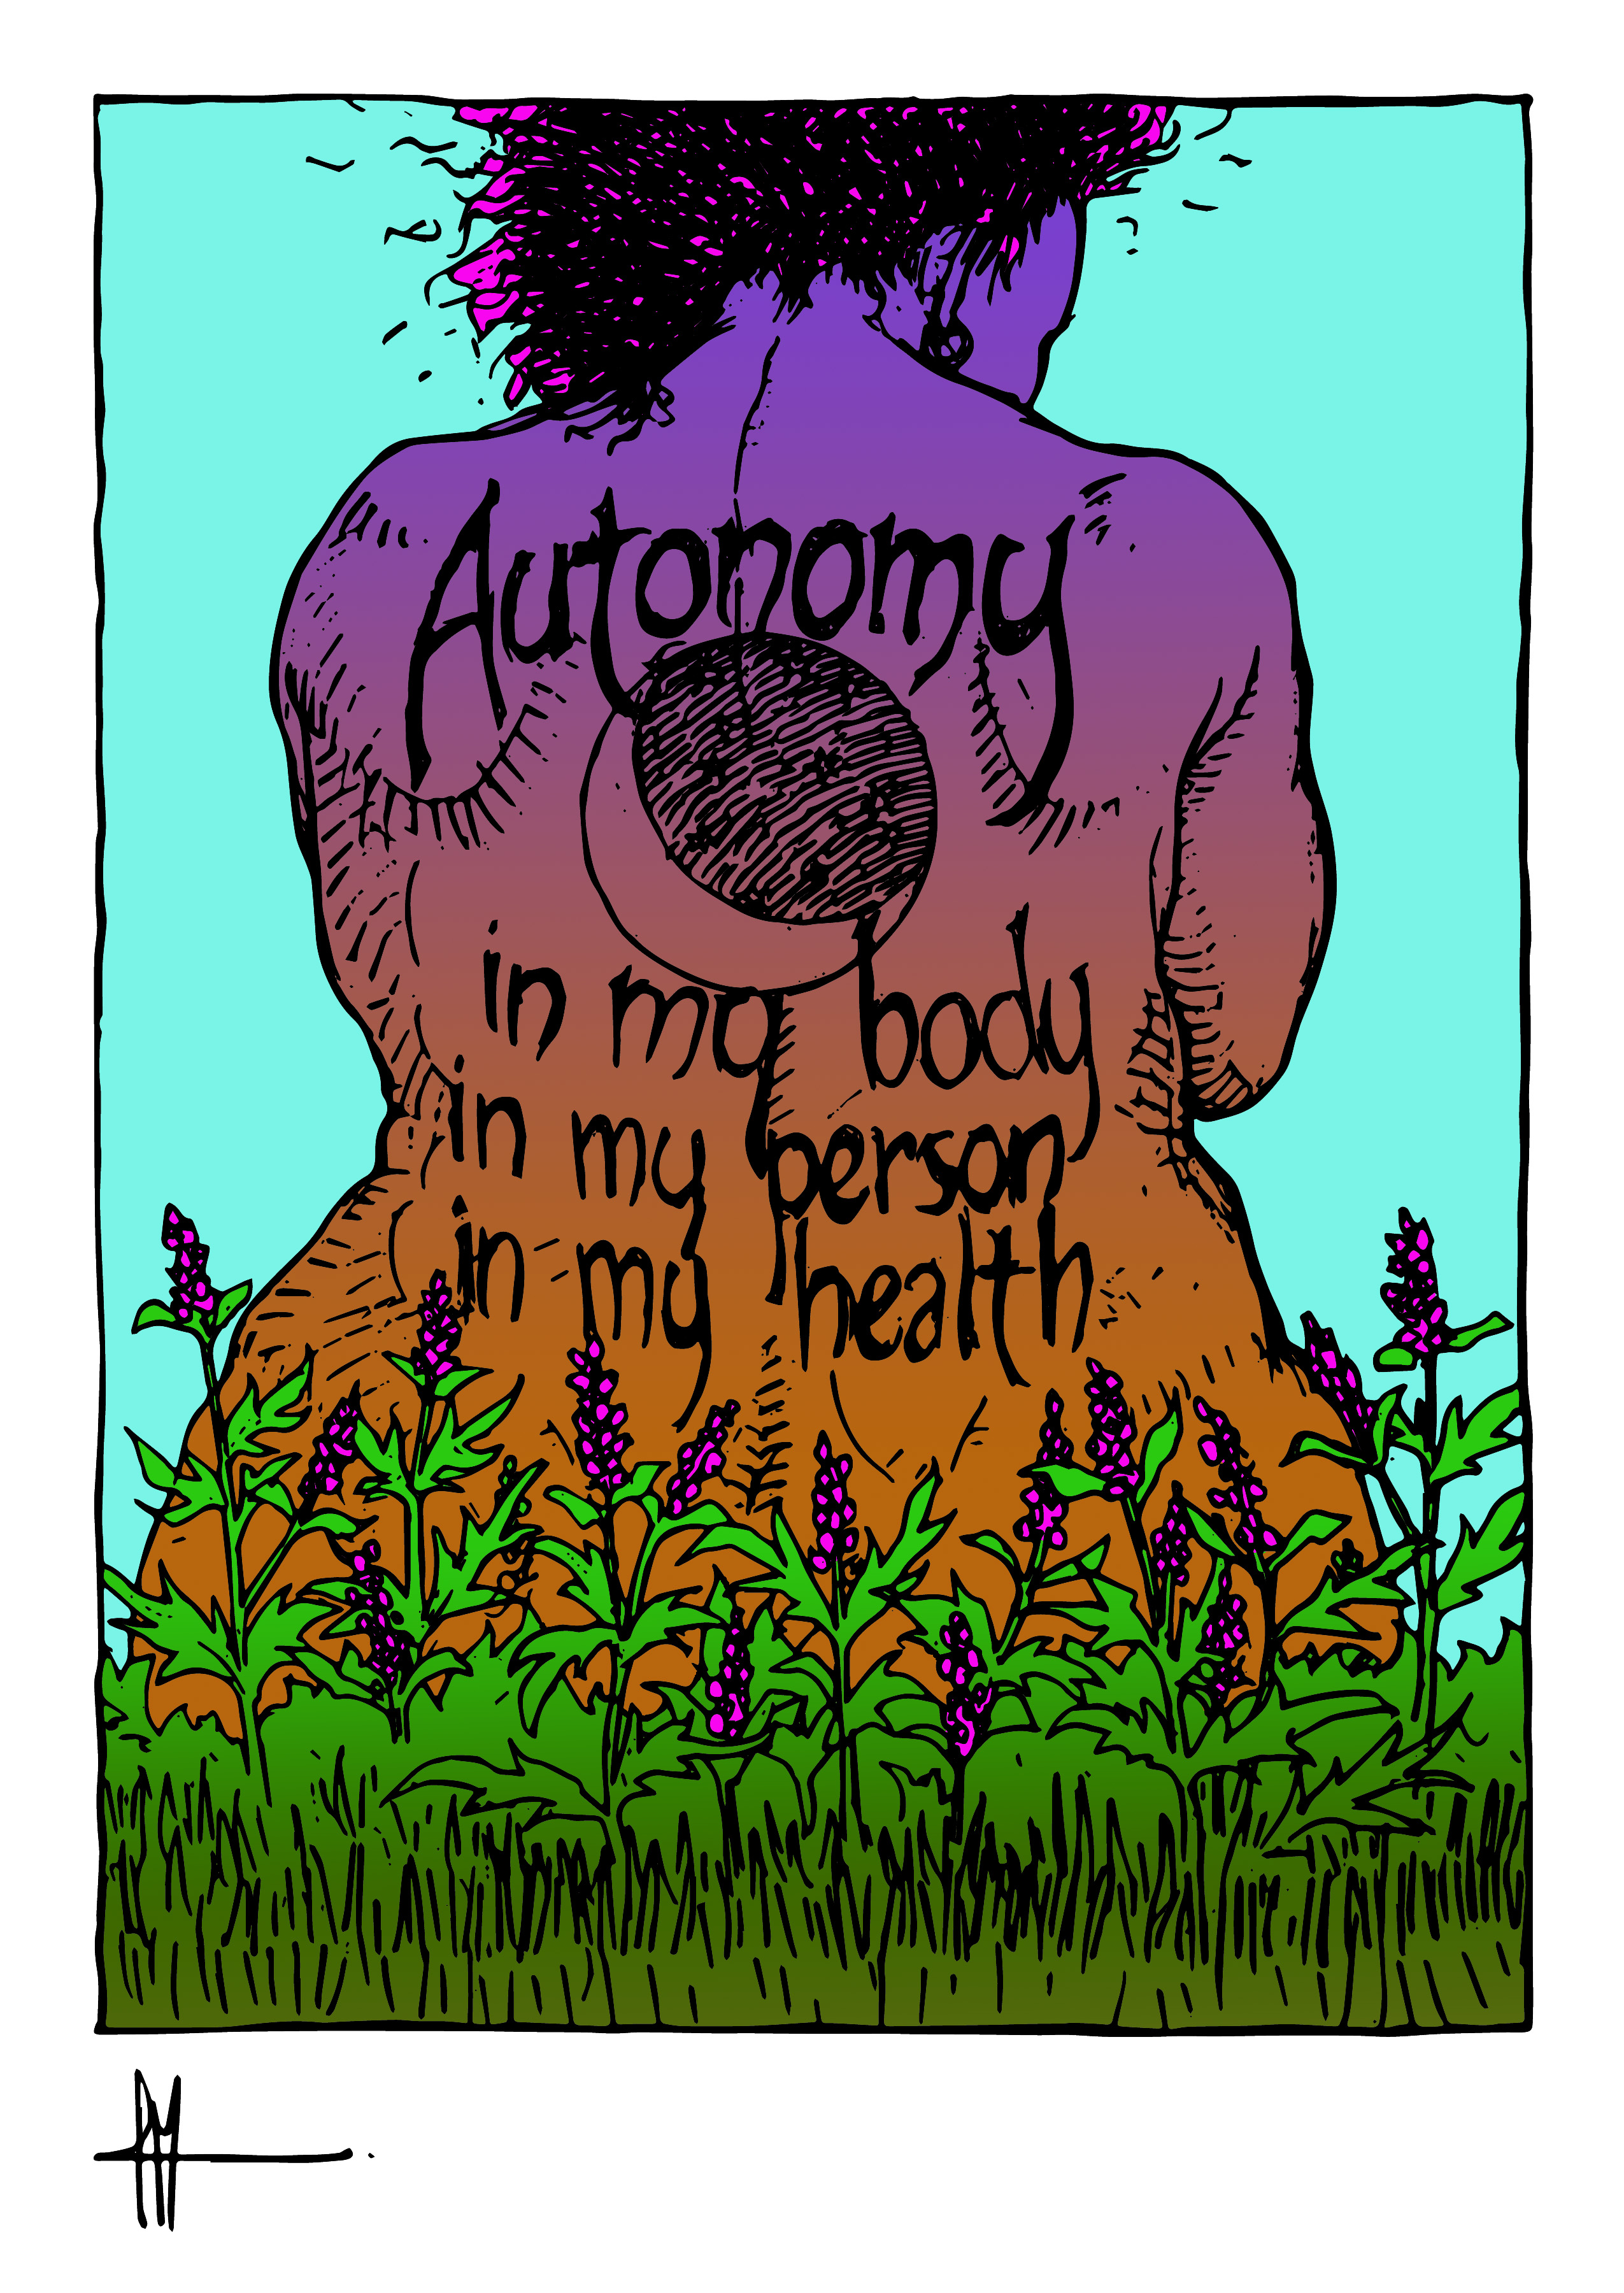 Autonomy in my body, in my person, in my health poster - message on an image of a woman's back